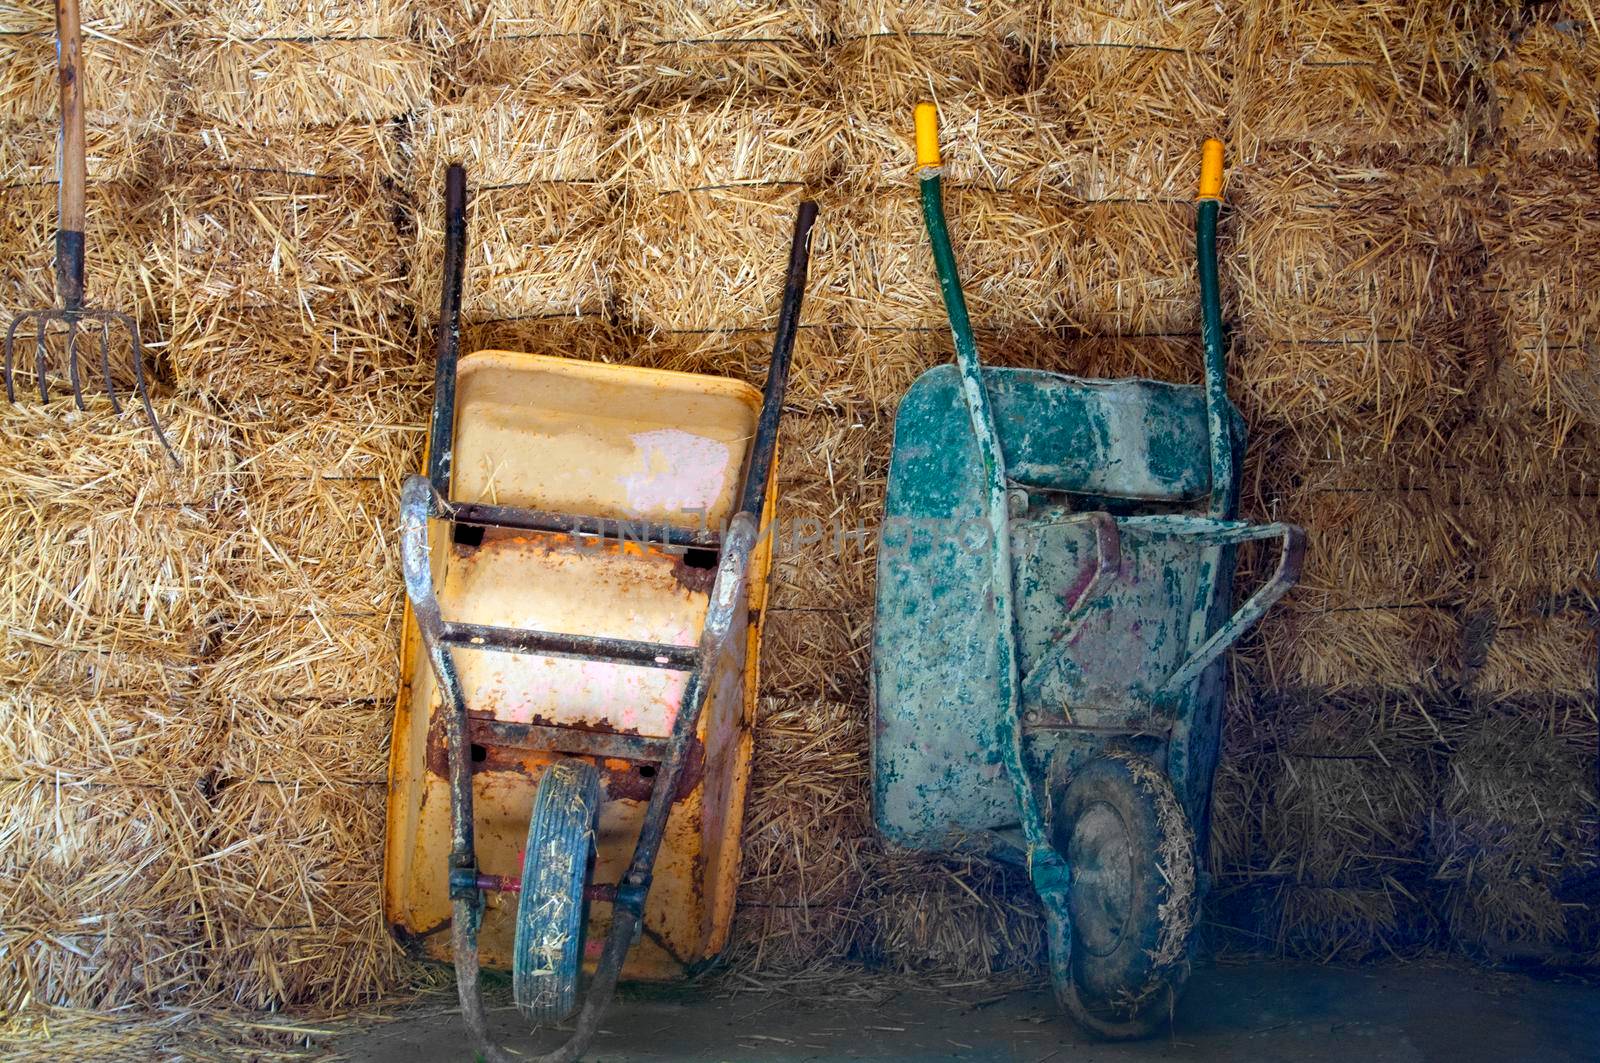 Two wheelbarrows on the hay background by Bezdnatm